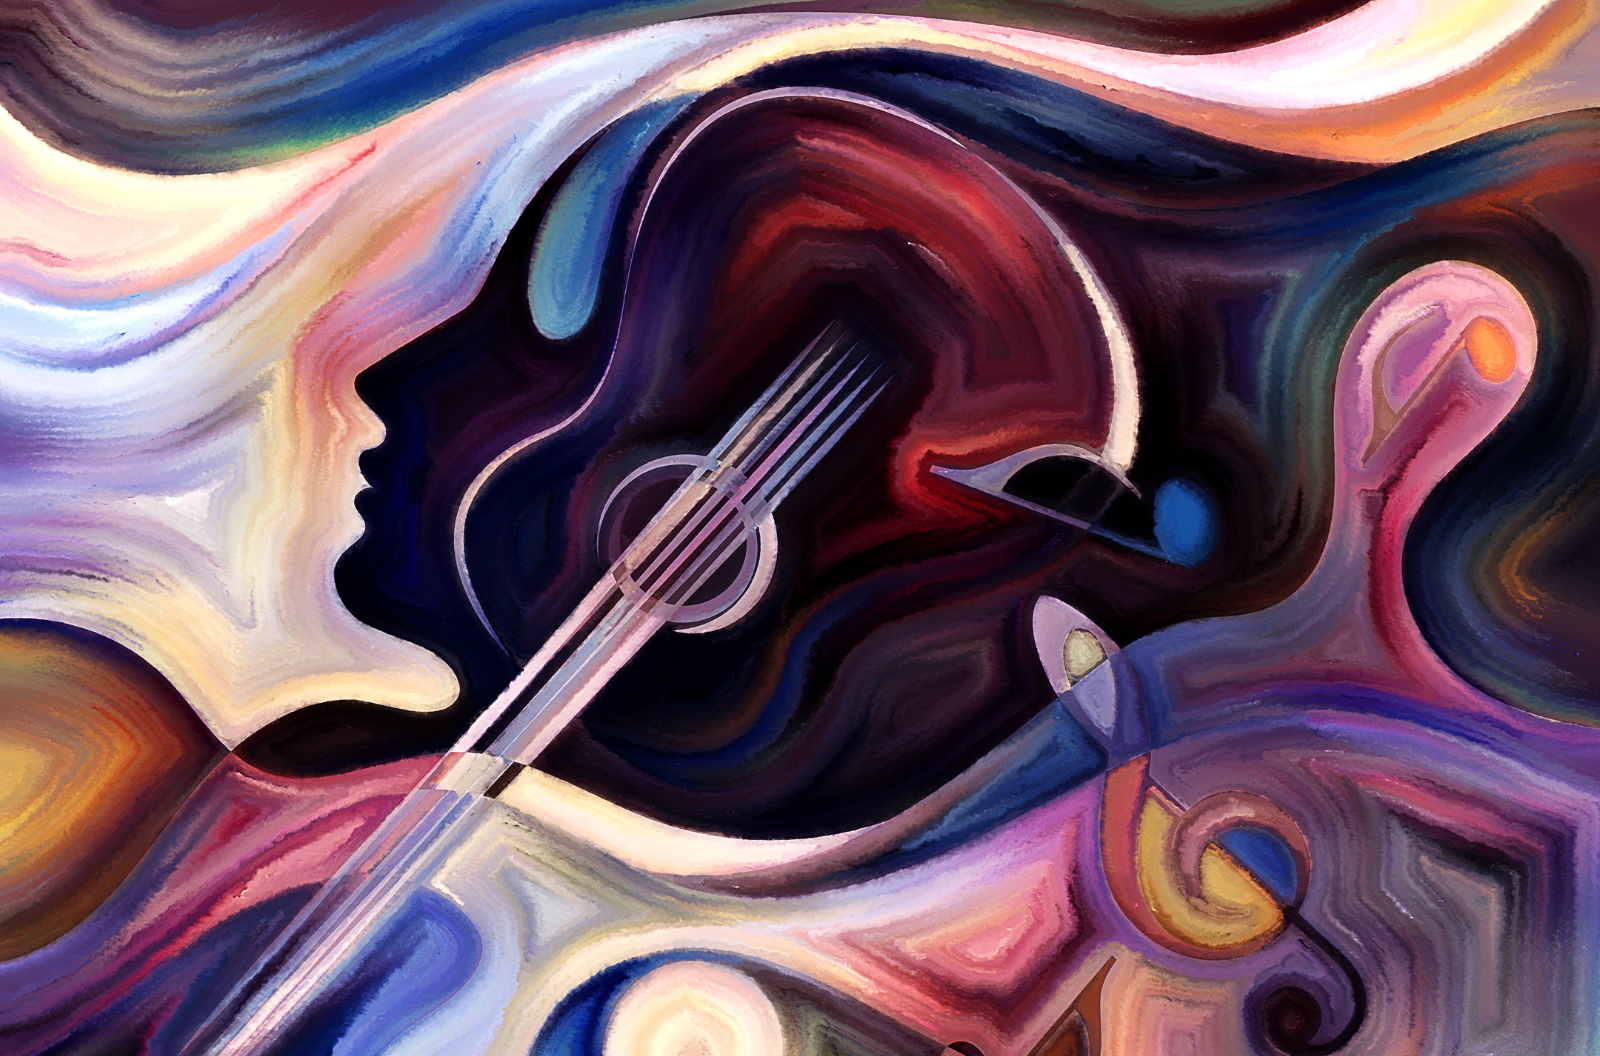 A cubist painting of a guitar blending in with the head of a person with long hair.